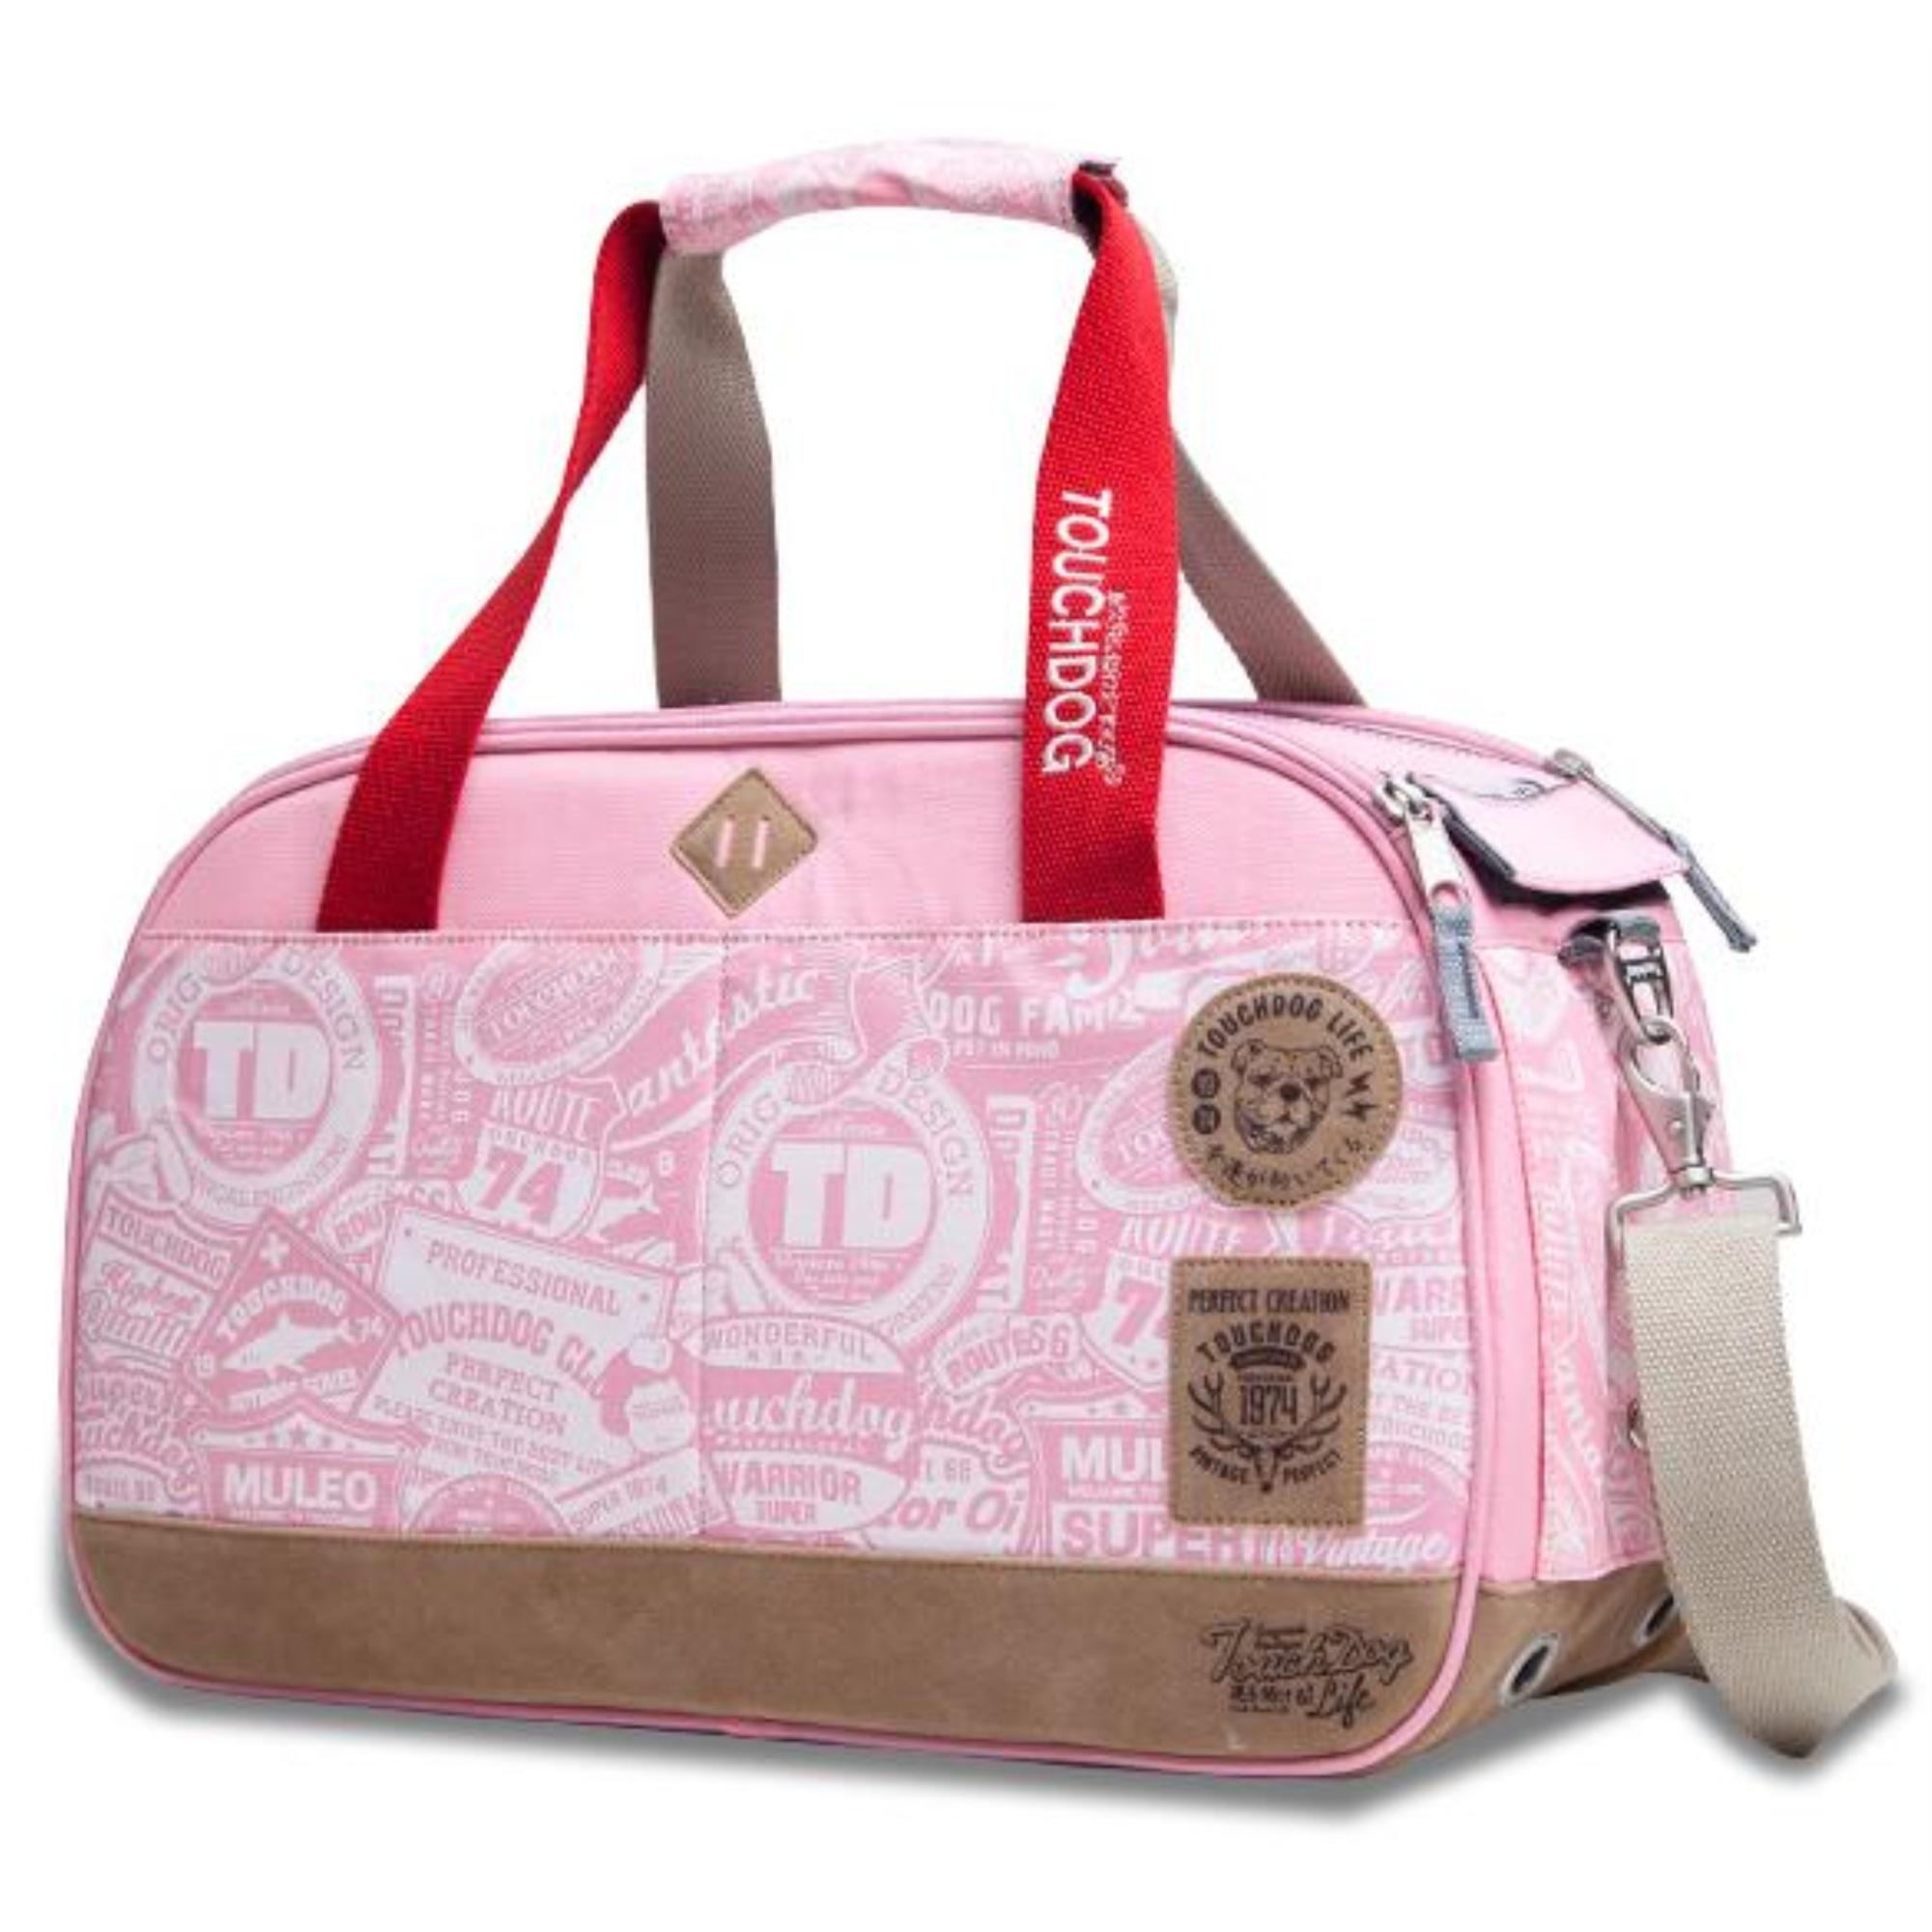 Touchdog Airline Approved Around-The-Globe pasport Designer Pet Carrier- One Size/Pink